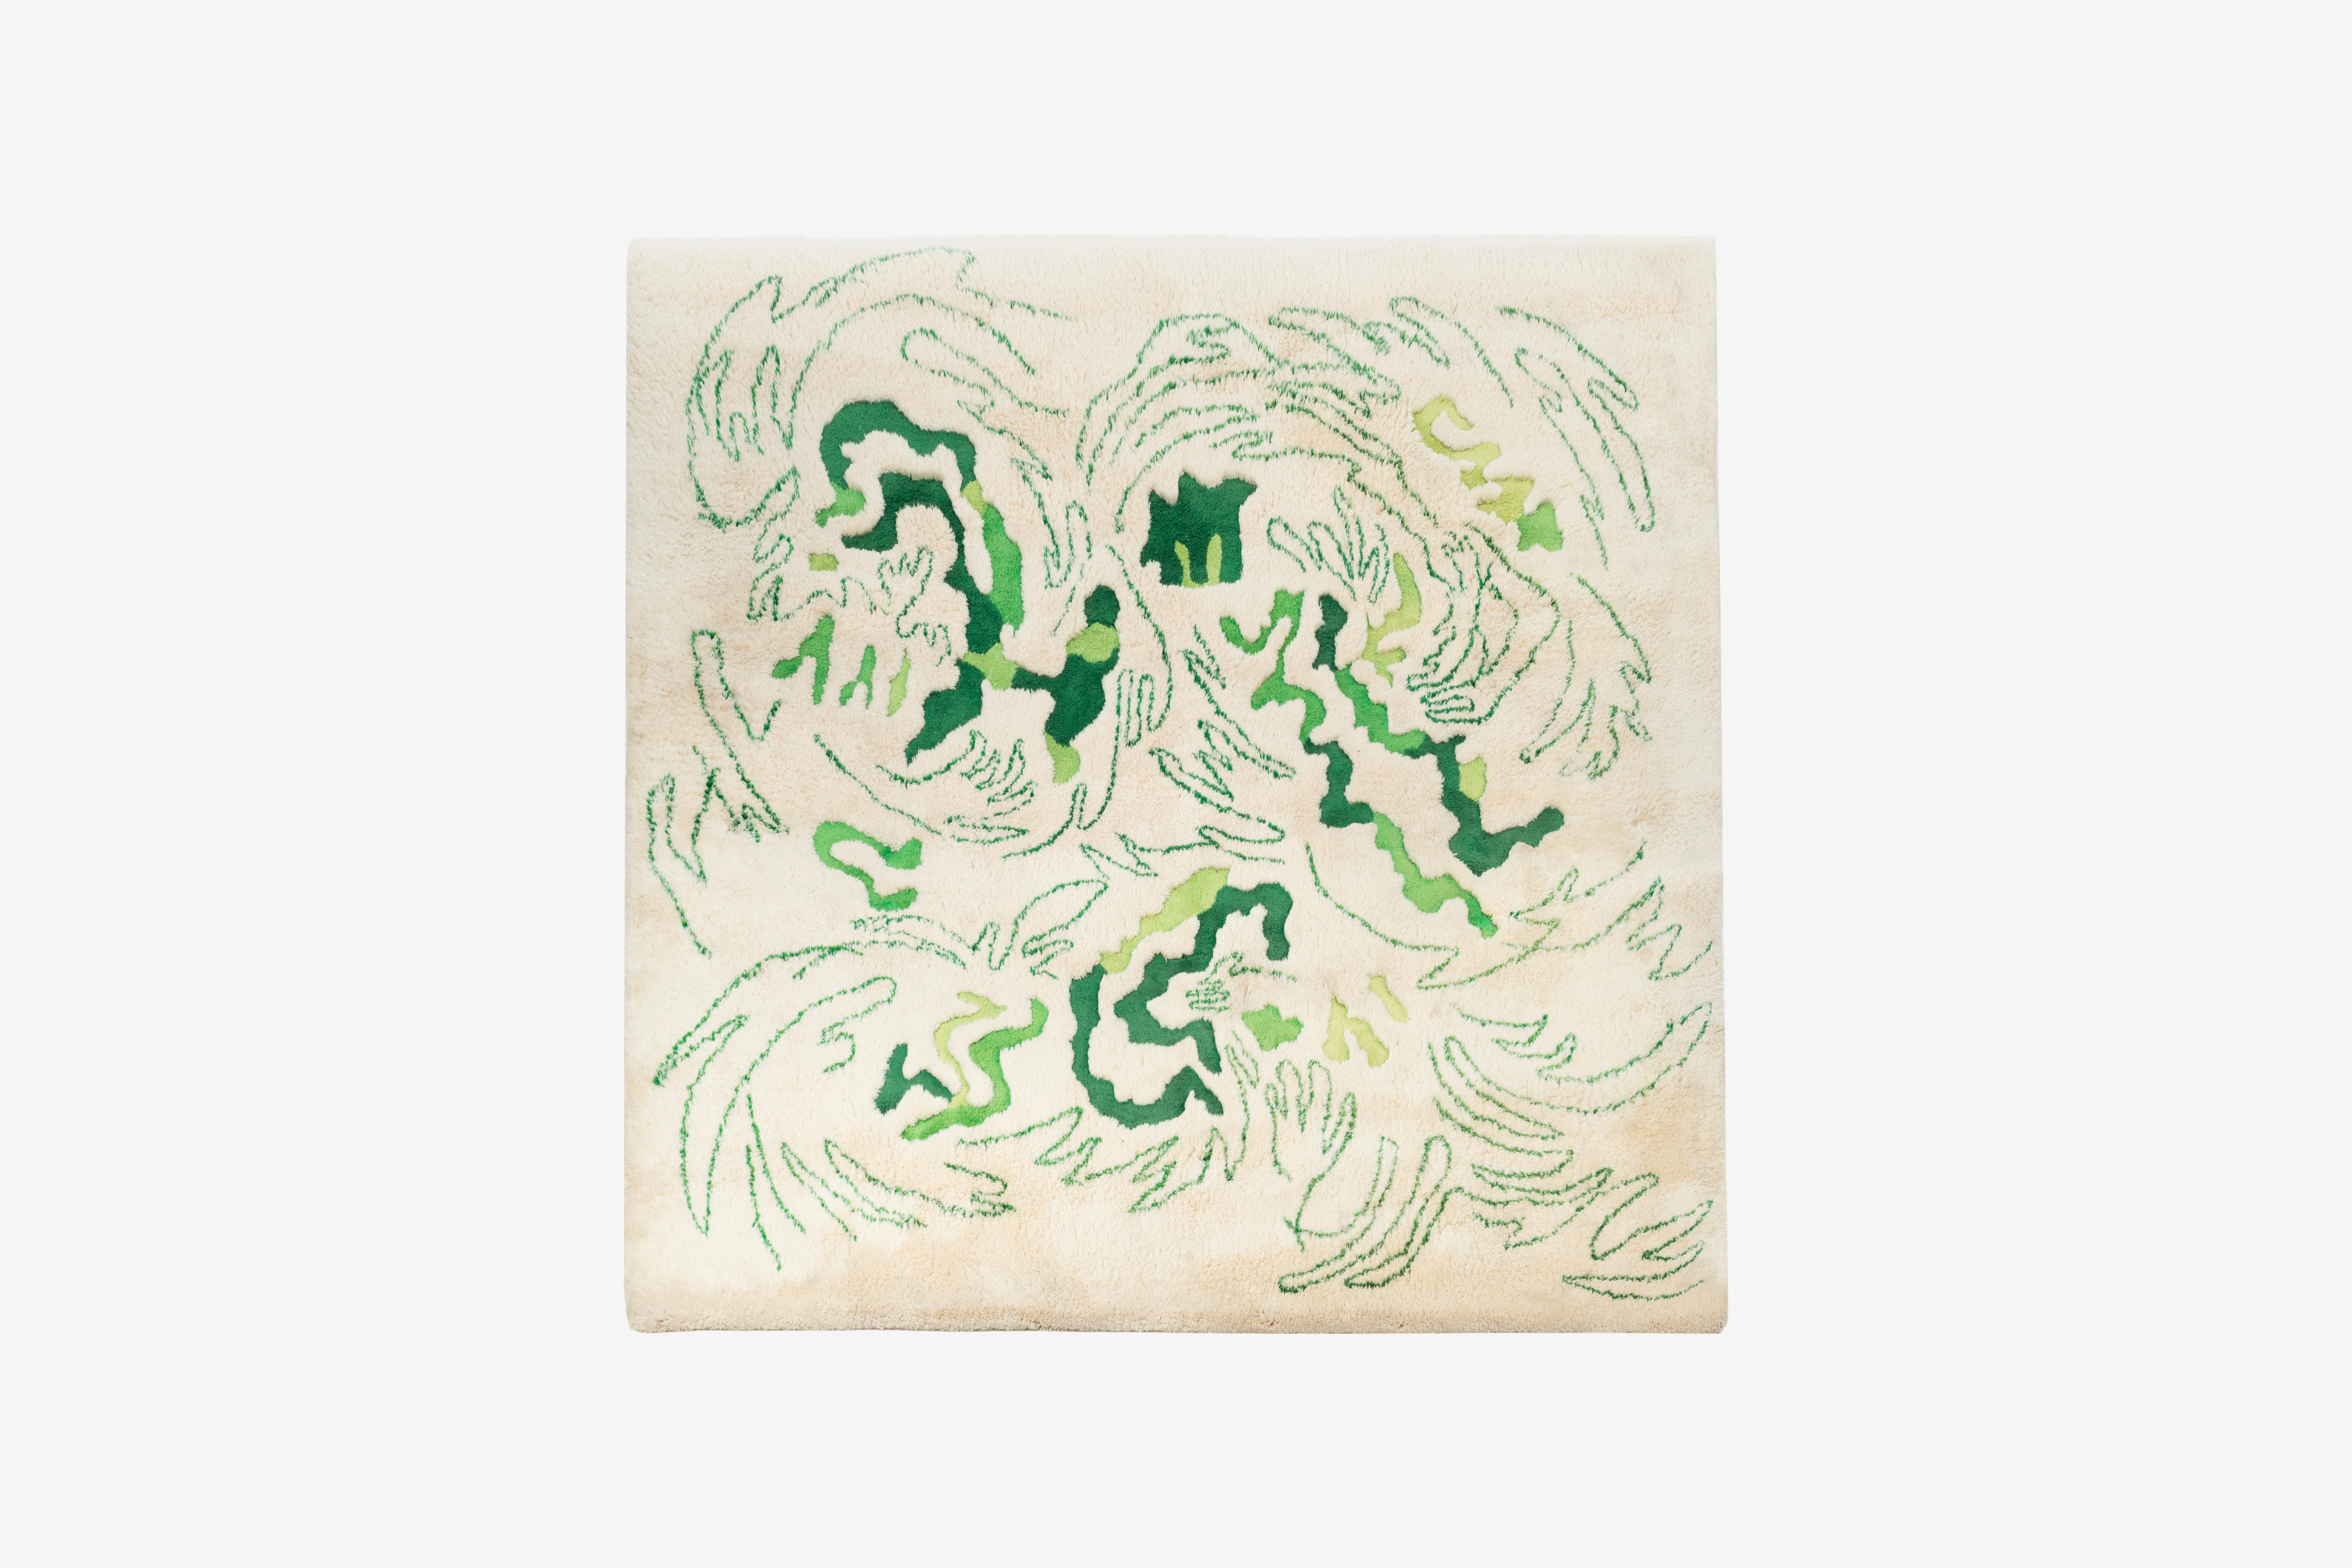 Edward Fields abstract rug. Cream colored base with multiple greens of camouflage like squiggles.